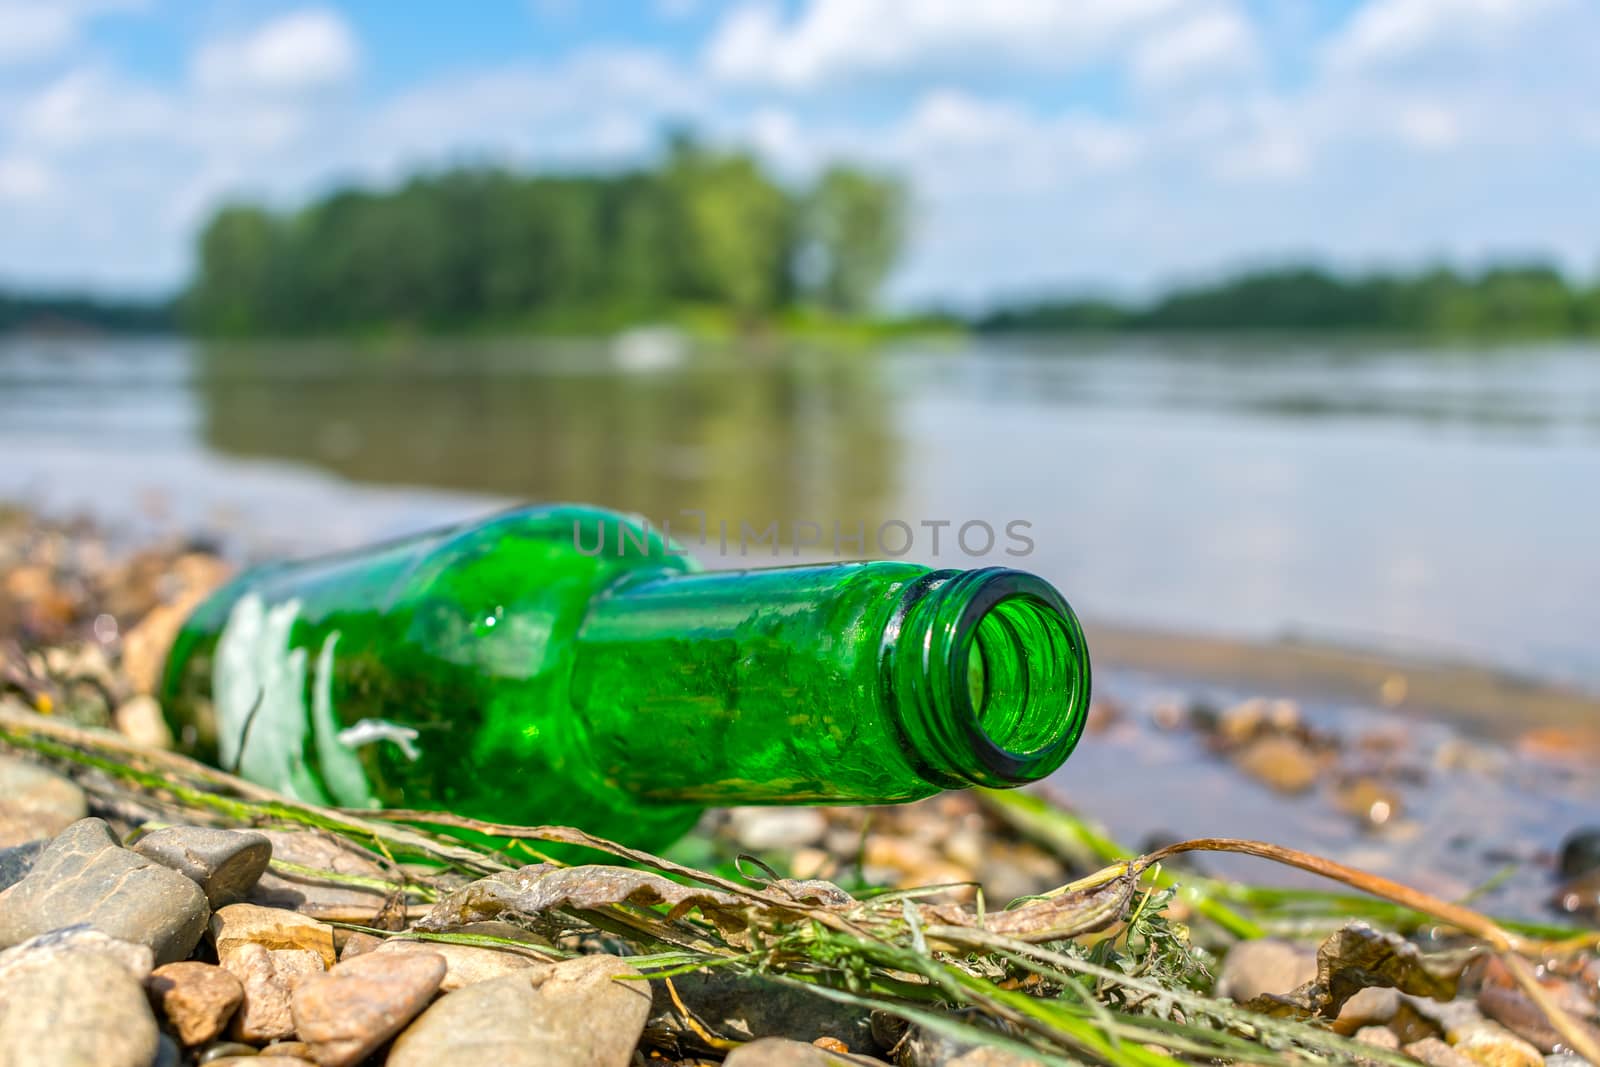 Glass bottle thrown ashore pollutes and harms nature